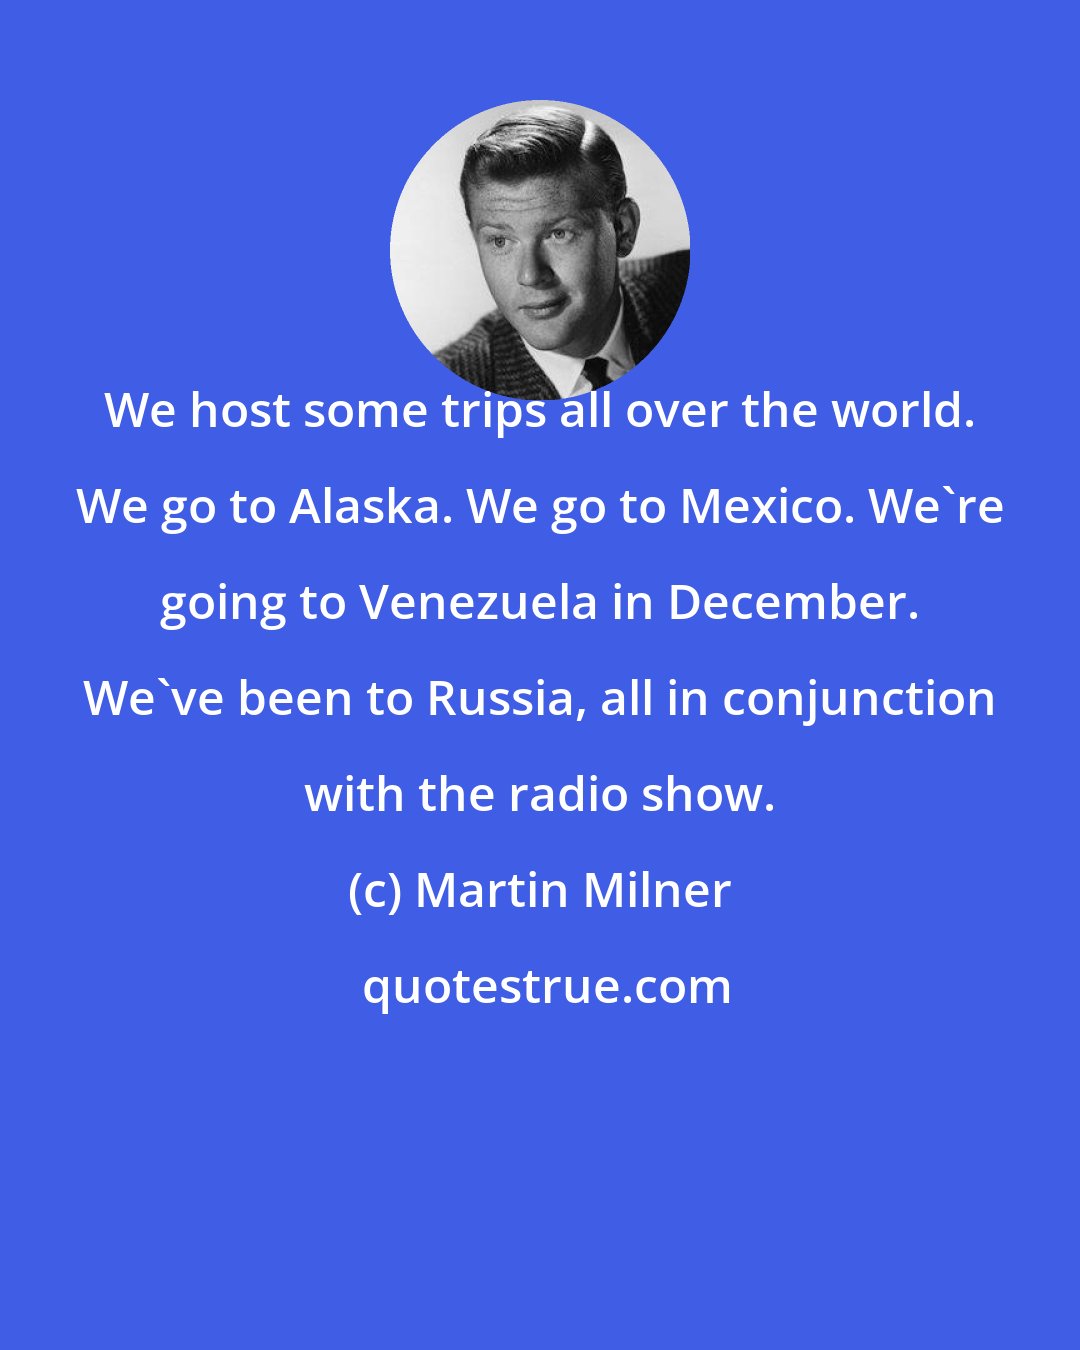 Martin Milner: We host some trips all over the world. We go to Alaska. We go to Mexico. We're going to Venezuela in December. We've been to Russia, all in conjunction with the radio show.